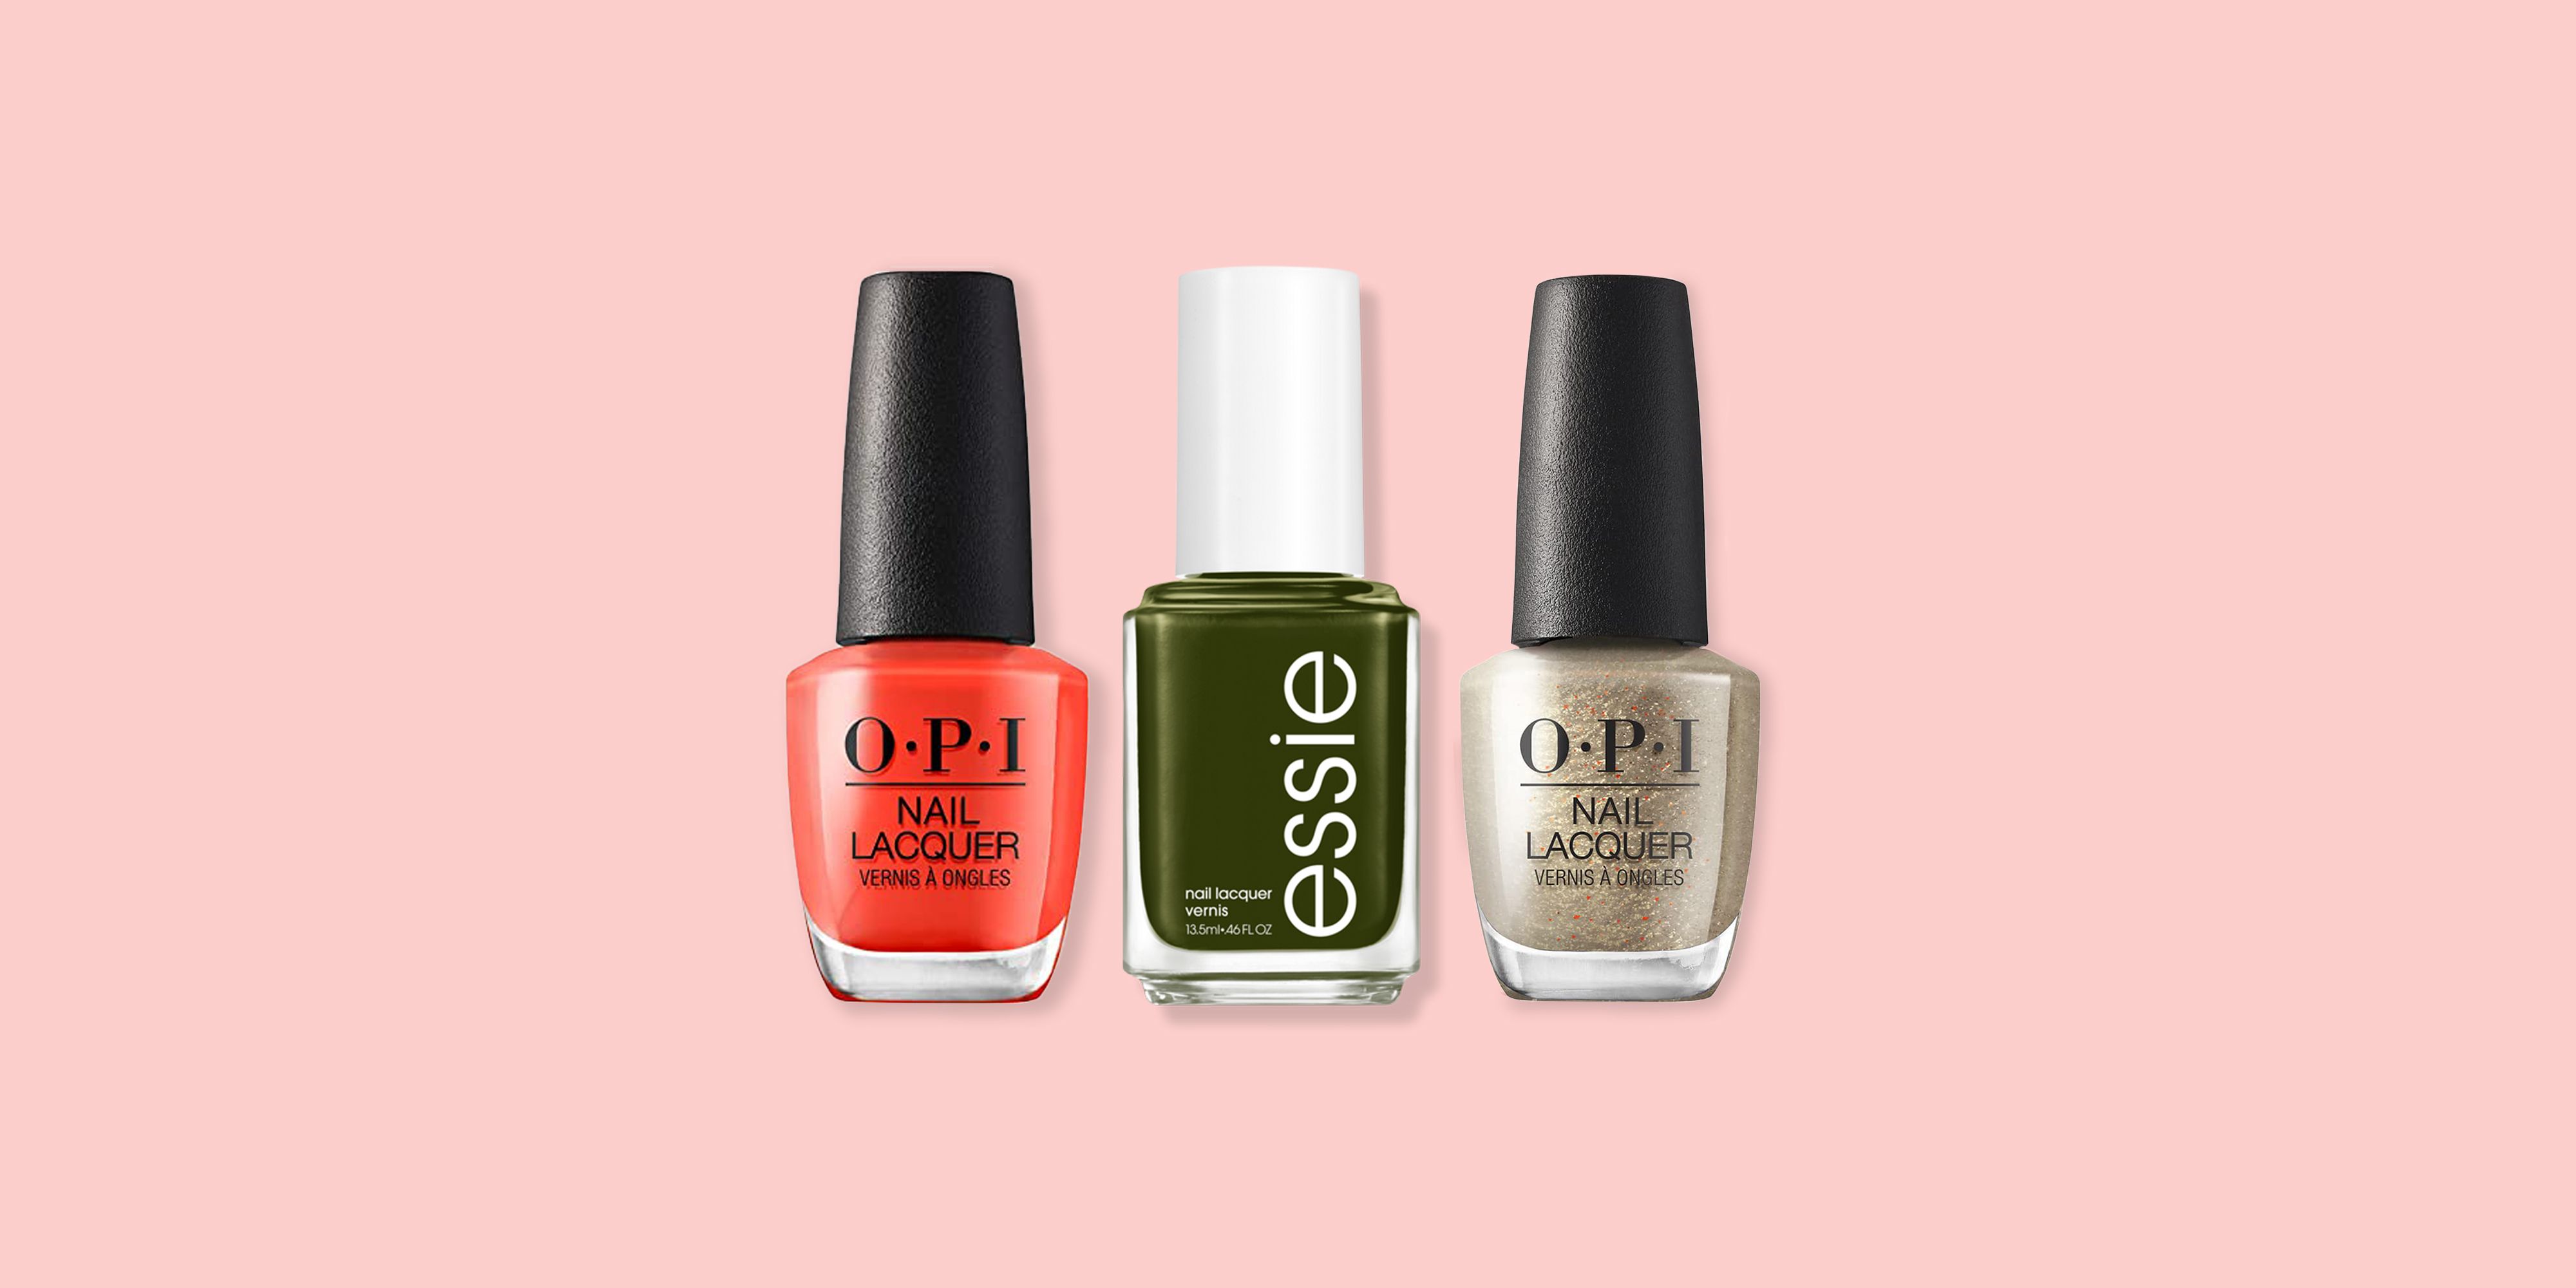 5 Fall Nail Colors to Try - Uptown with Elly Brown